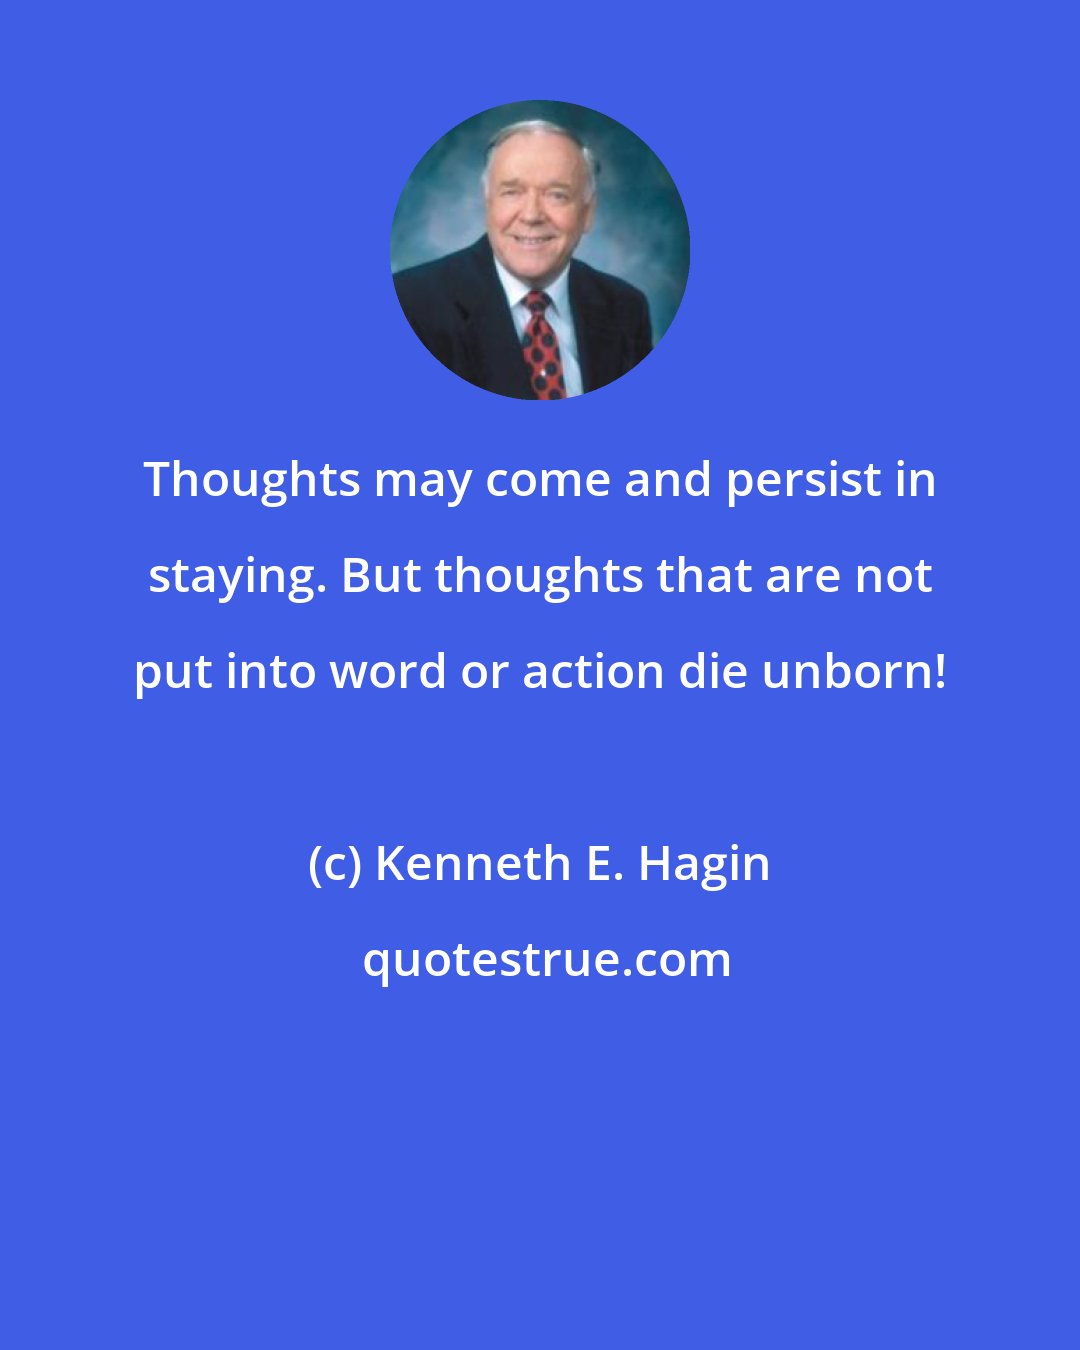 Kenneth E. Hagin: Thoughts may come and persist in staying. But thoughts that are not put into word or action die unborn!